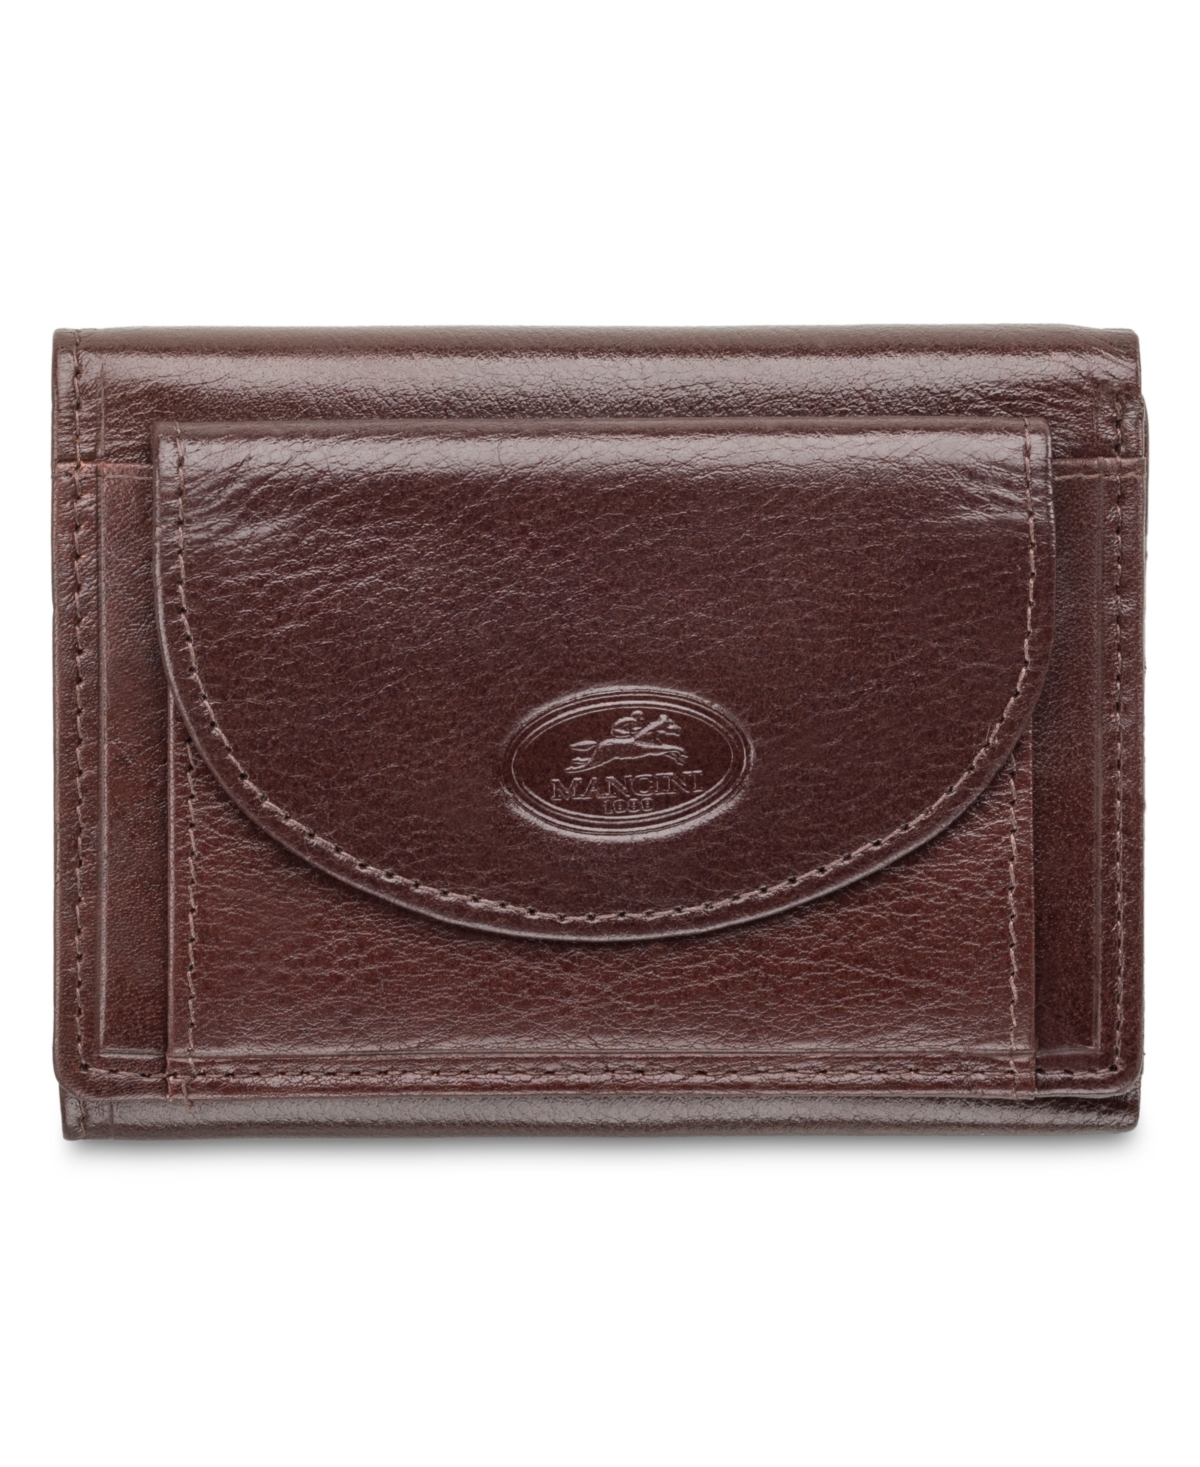 Men's Mancini Equestrian2 Collection Rfid Secure Trifold Wallet with Coin Pocket - Brown